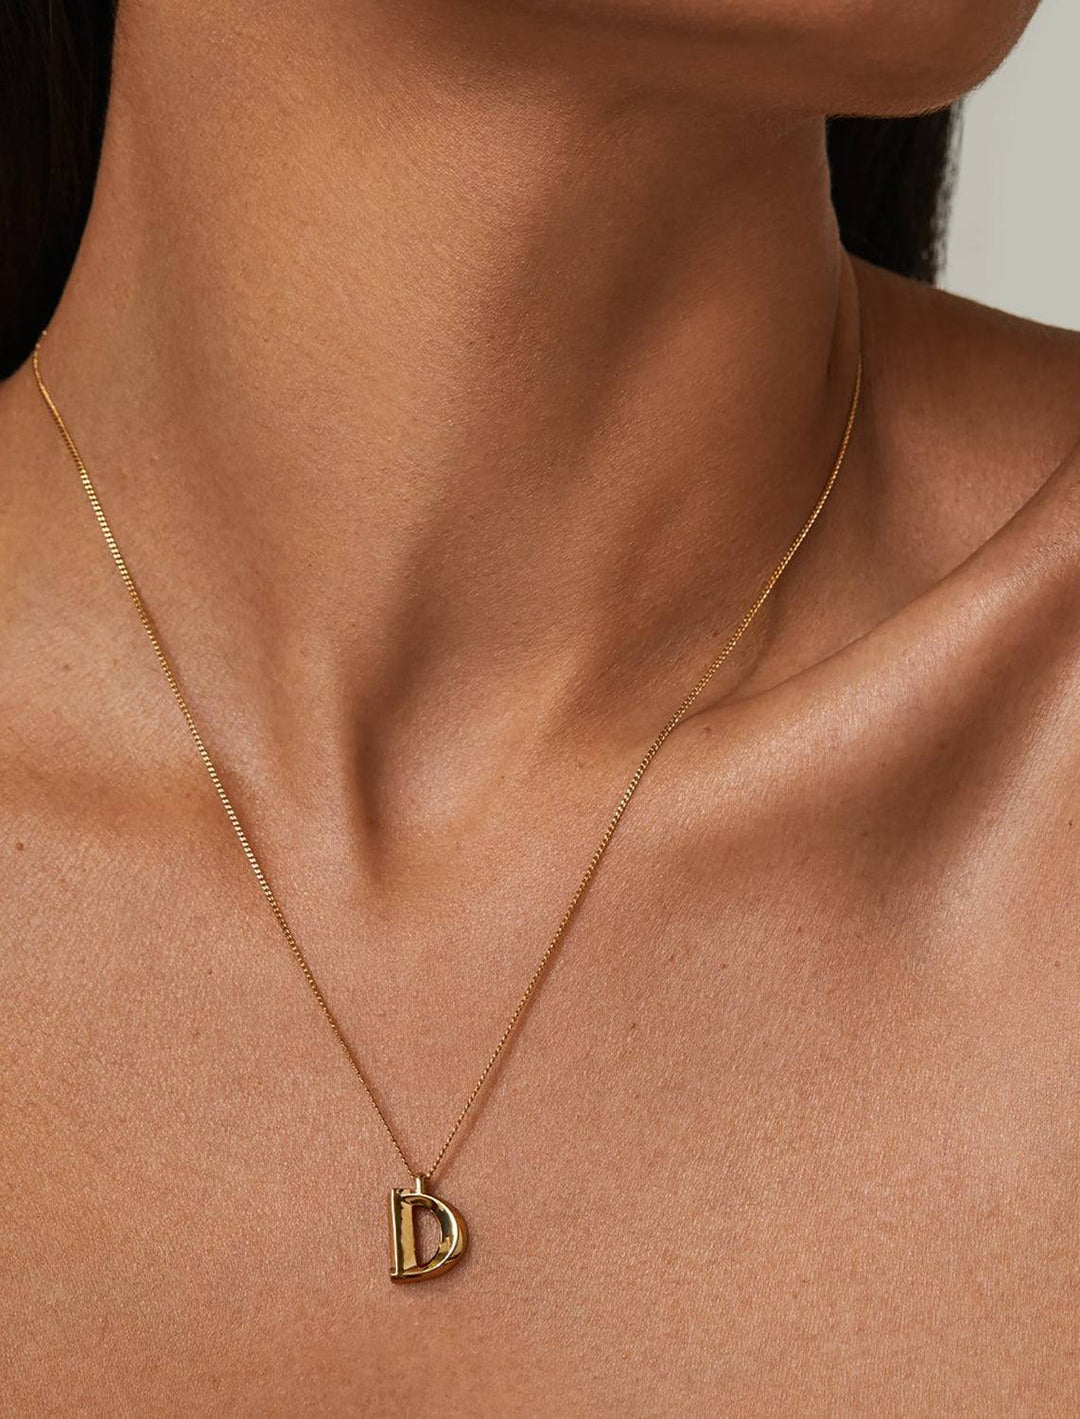 model wearing monogram necklace in gold | D